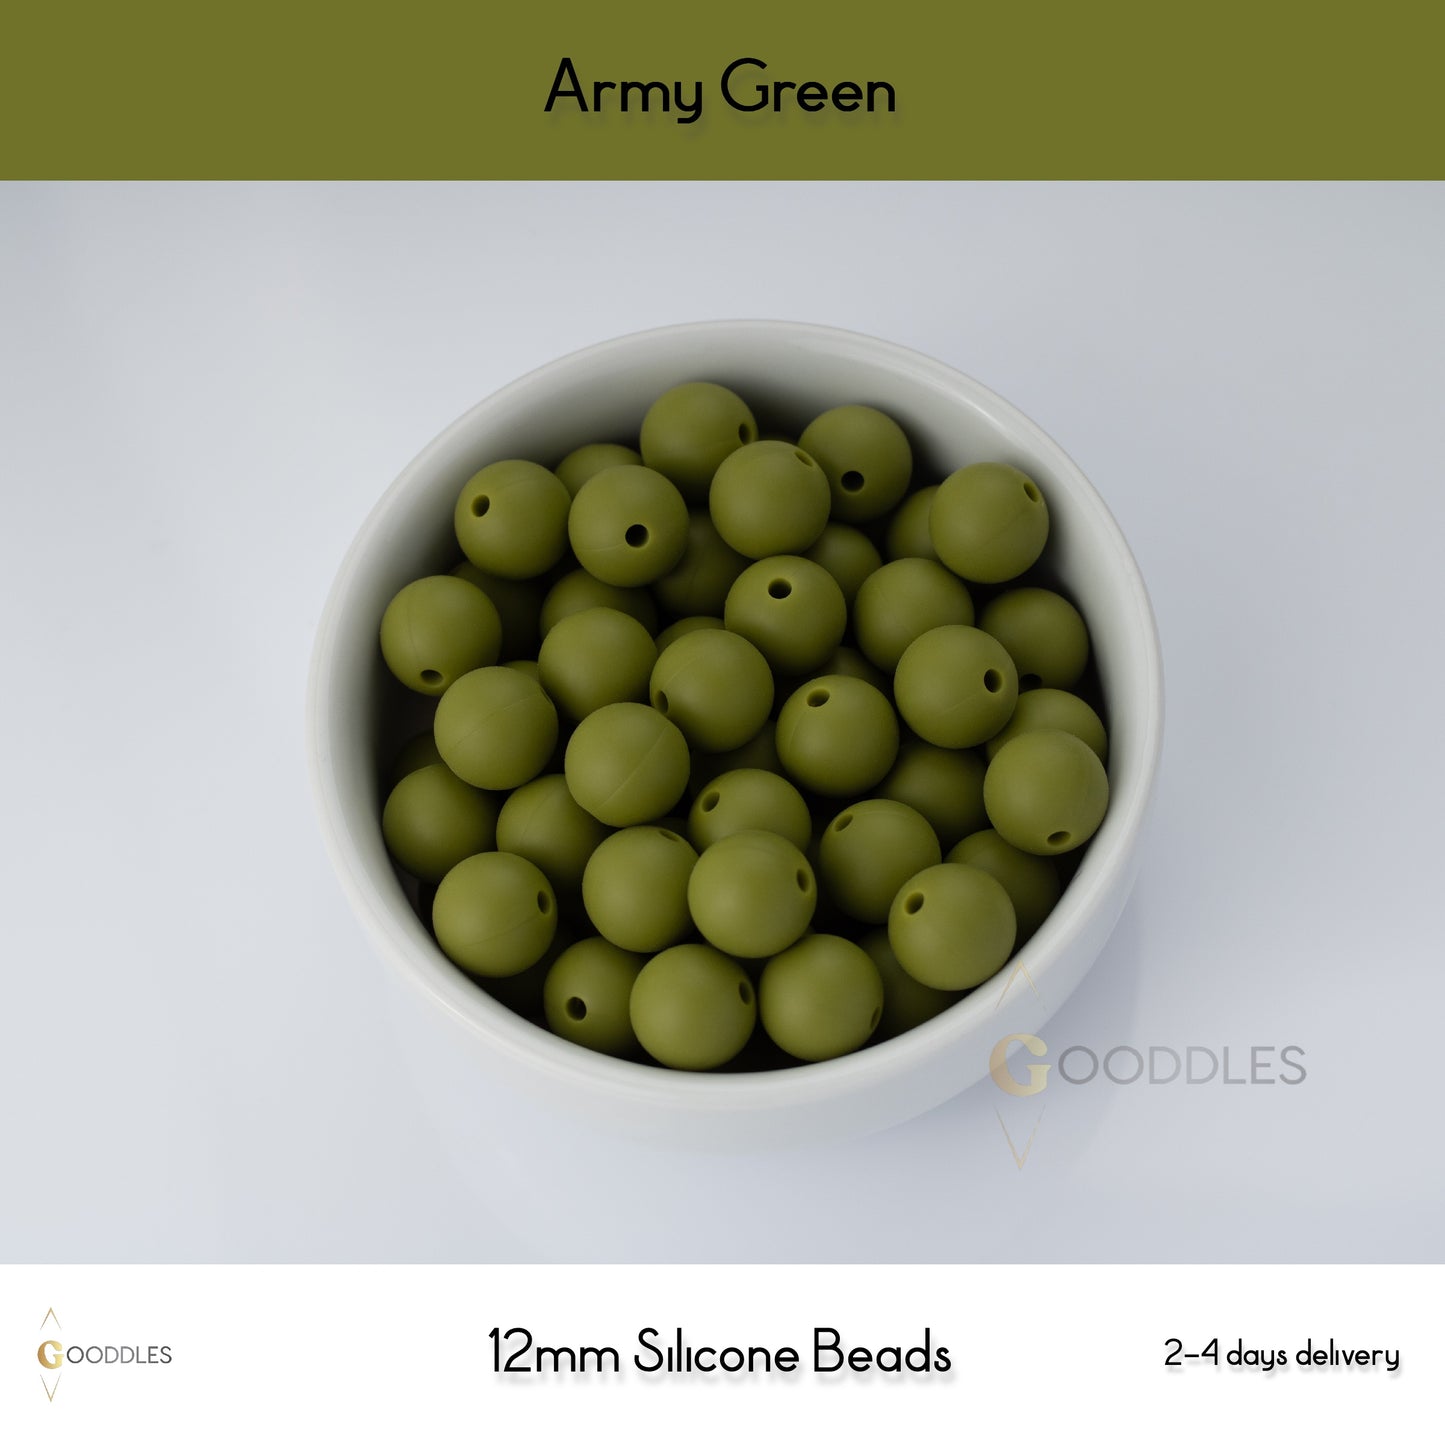 5pcs, Army Green Silicone Beads Round Silicone Beads